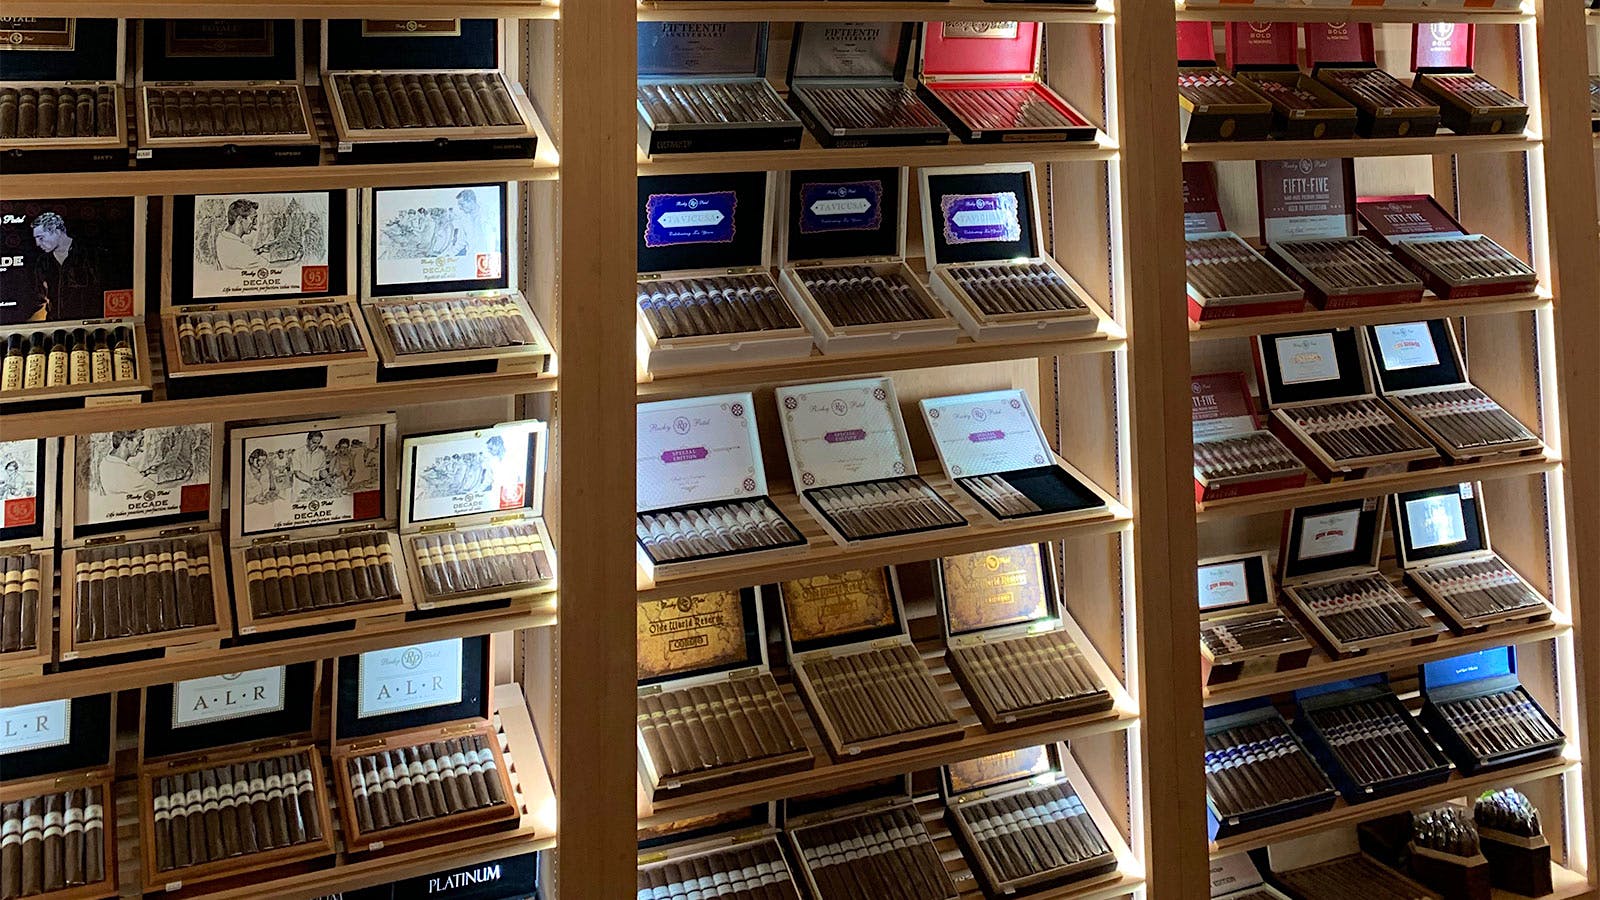 The humidor at Burn carries a large variety of Rocky Patel cigars